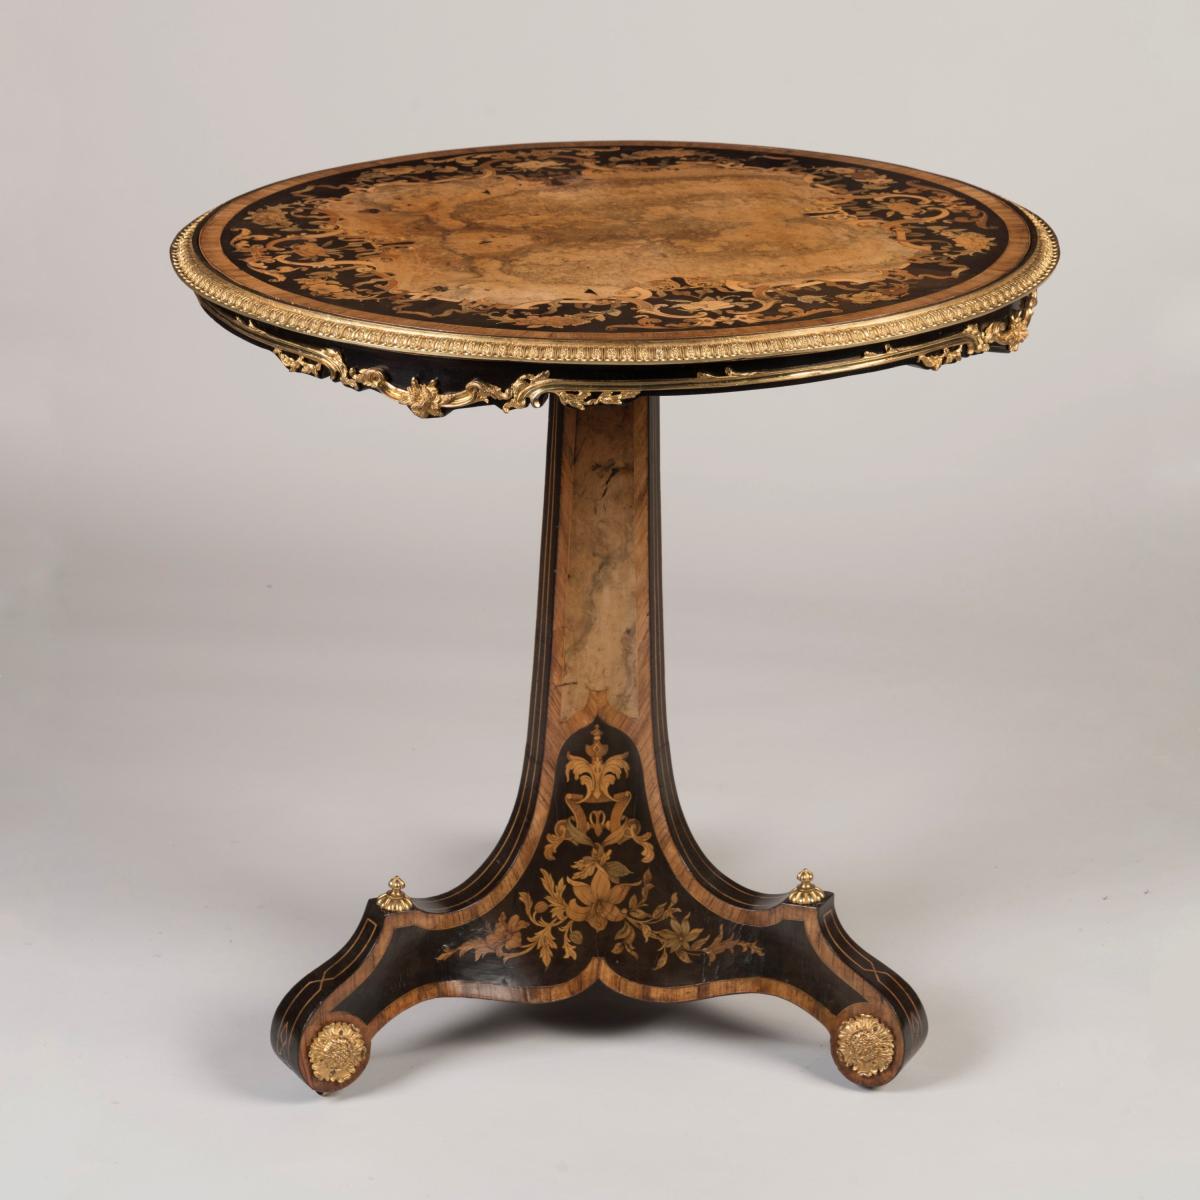 Marquetry Inlaid Table In the manner of Gillows